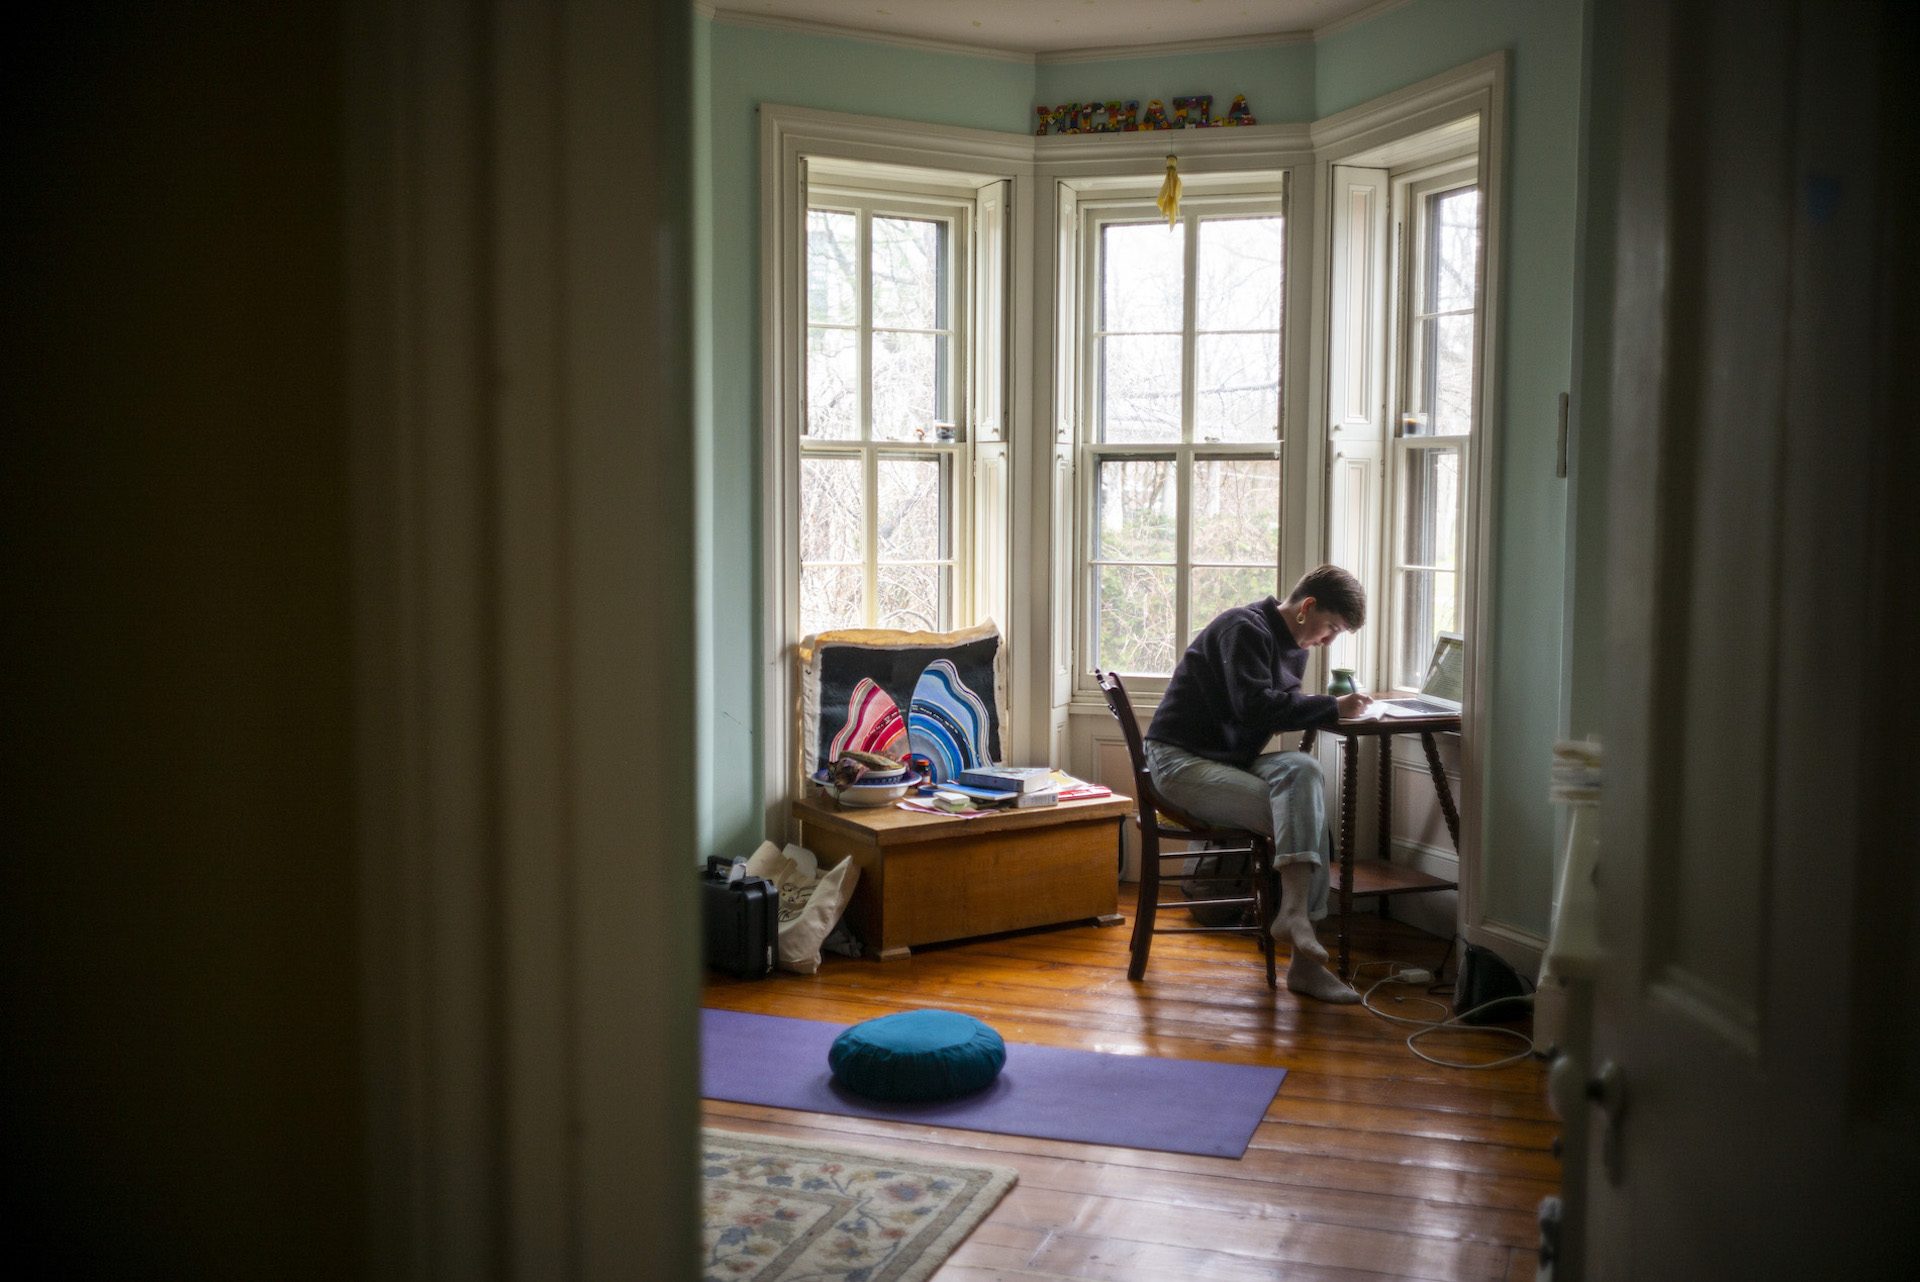 Michaela Prell, Riley's sister, is a senior at Sarah Lawrence College. She set up a make-shift desk in her old bedroom since school shut down.